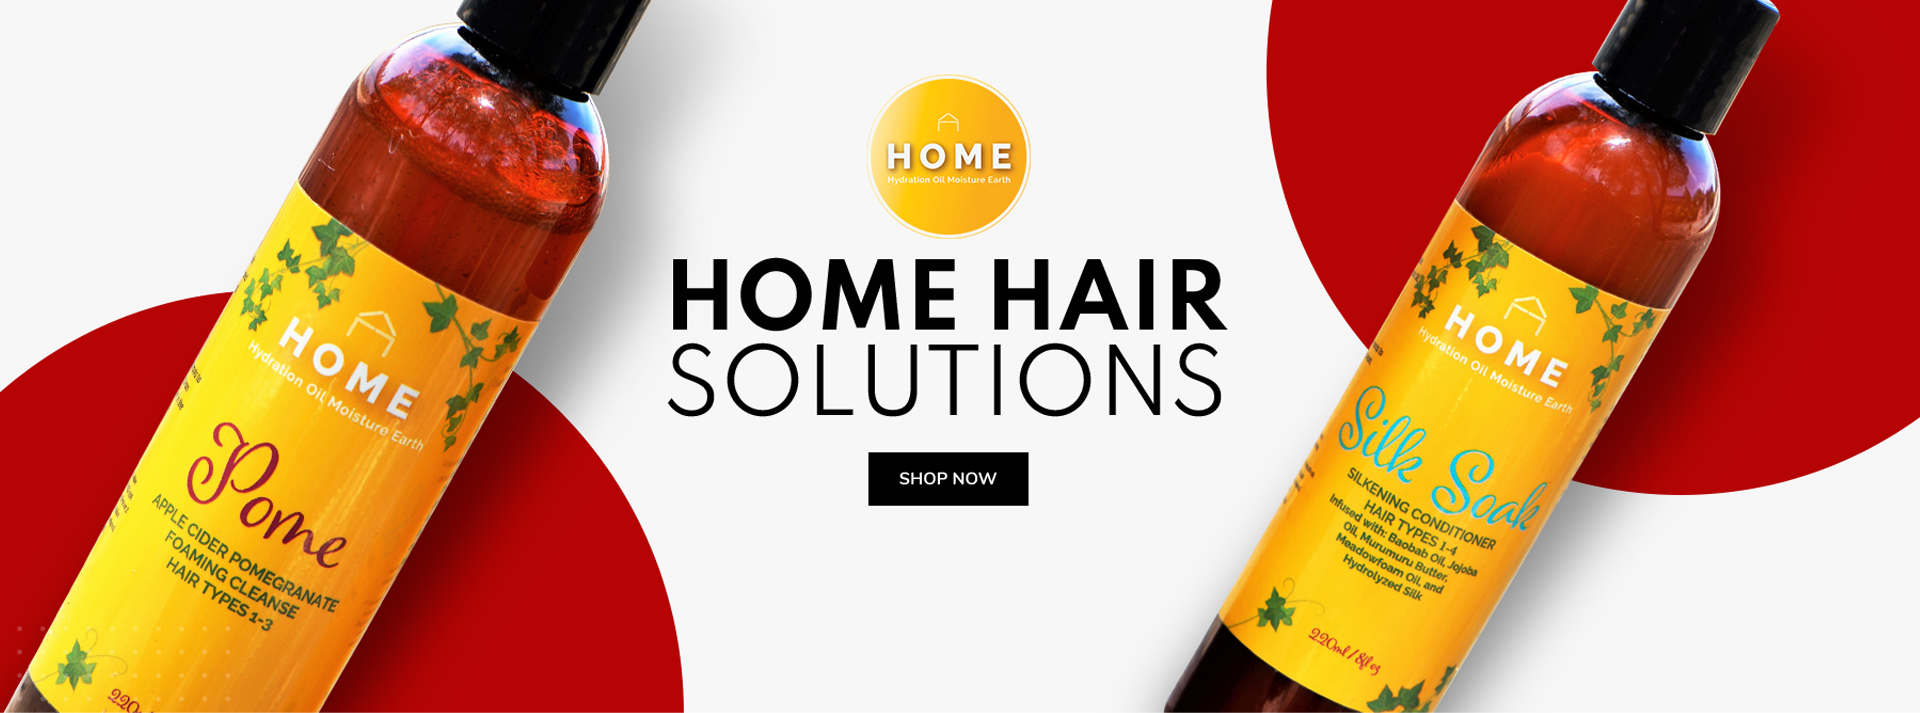 H.O.M.E Hair Solutions created by Cosmetologist Niquel Coleman introduces targeted texture formulas for proper hair care awareness of every person seeking organic products that really work.  We believe in the uniqueness of the 4 textures hair groups and o